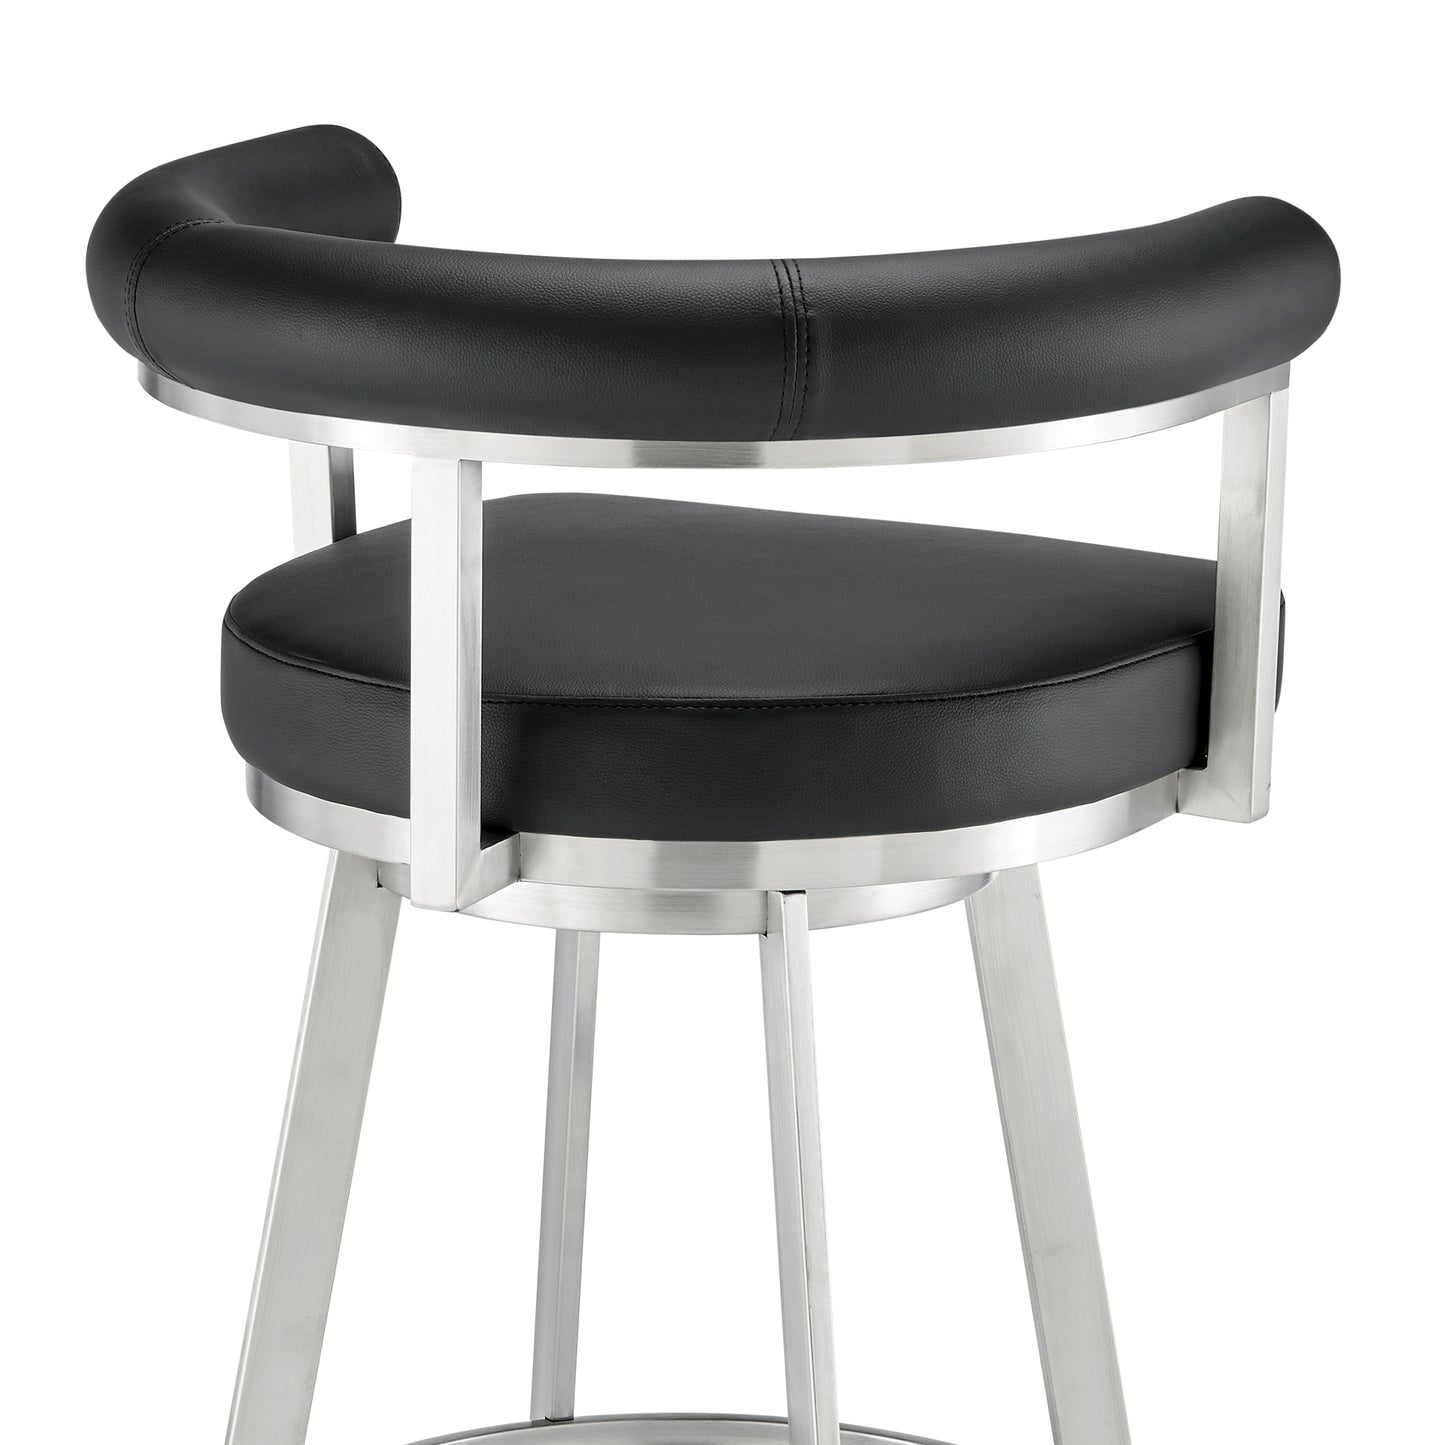 Magnolia 30" Swivel Bar Stool in Brushed Stainless Steel with Black Faux Leather